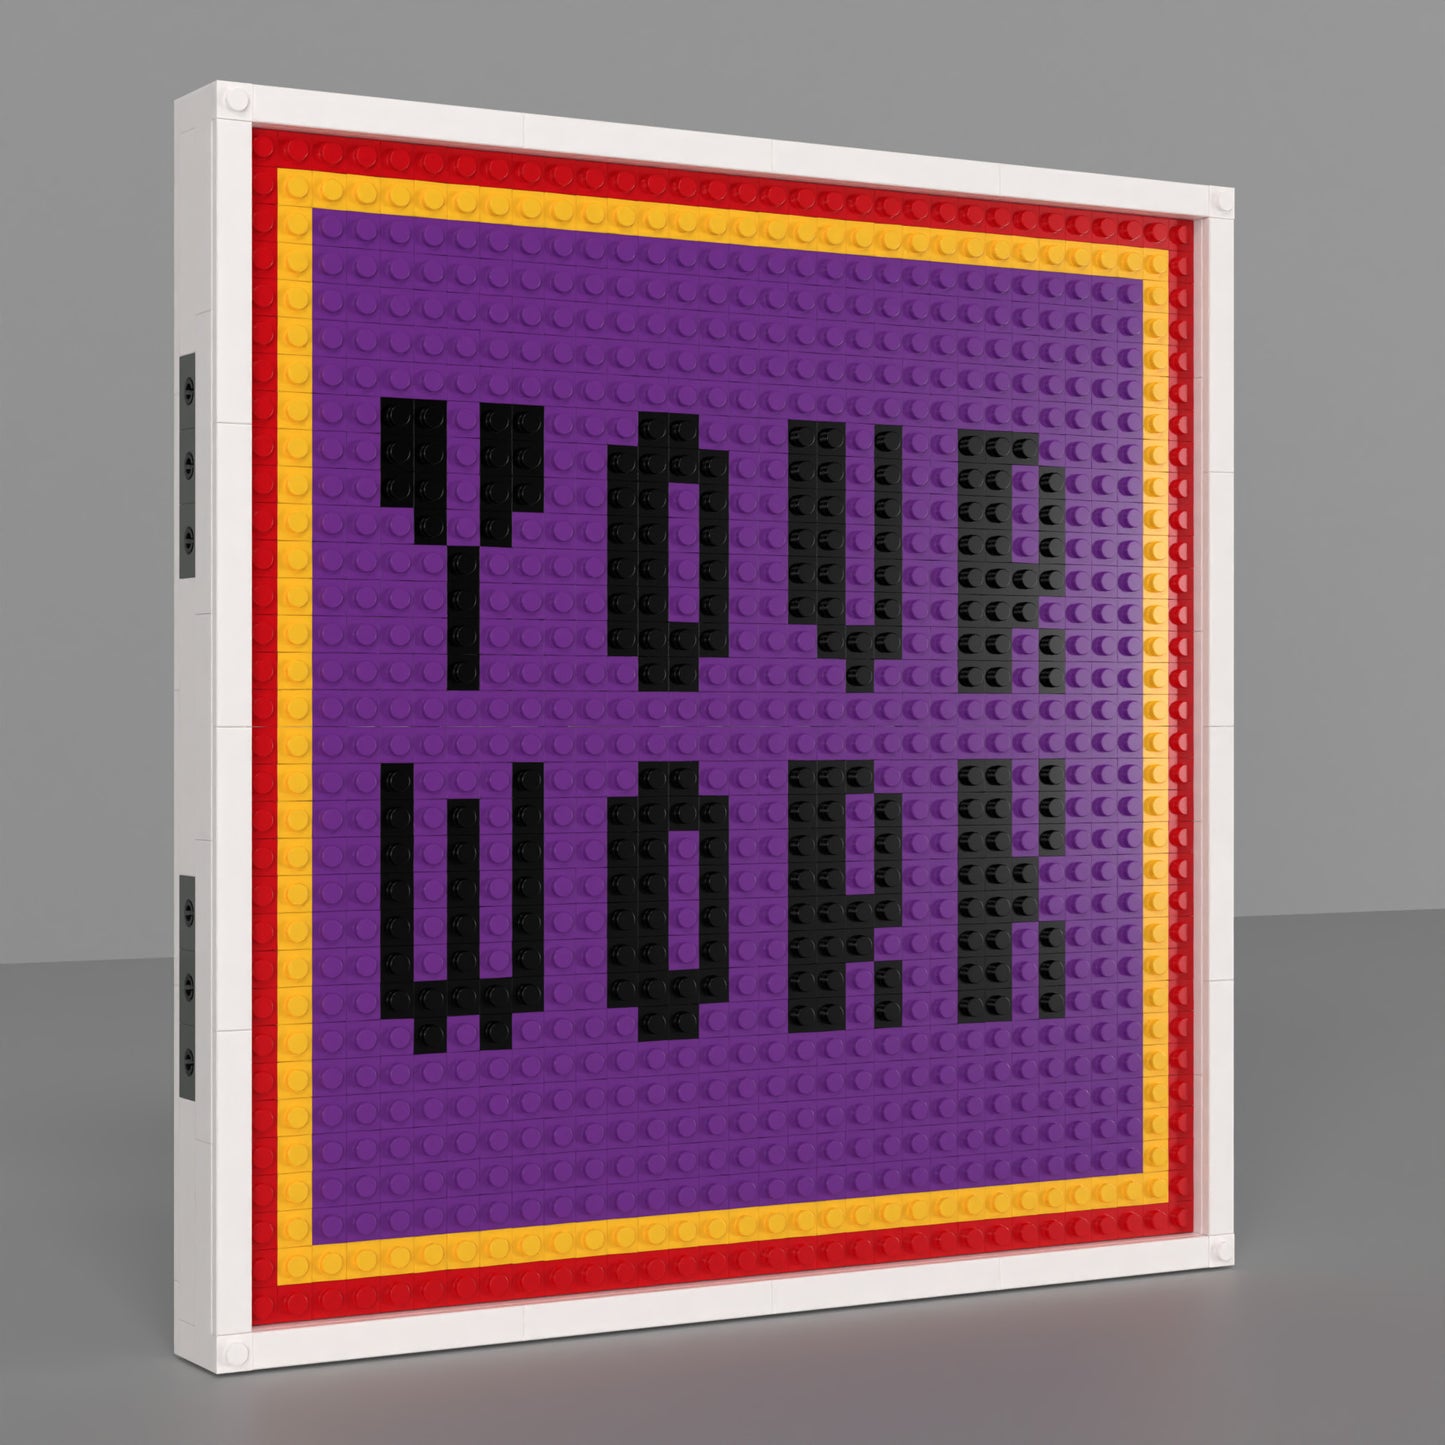 Customize a  32x32 Pixel Building Brick Mosaic Art Kit- We'll Ship Based on Your Design!